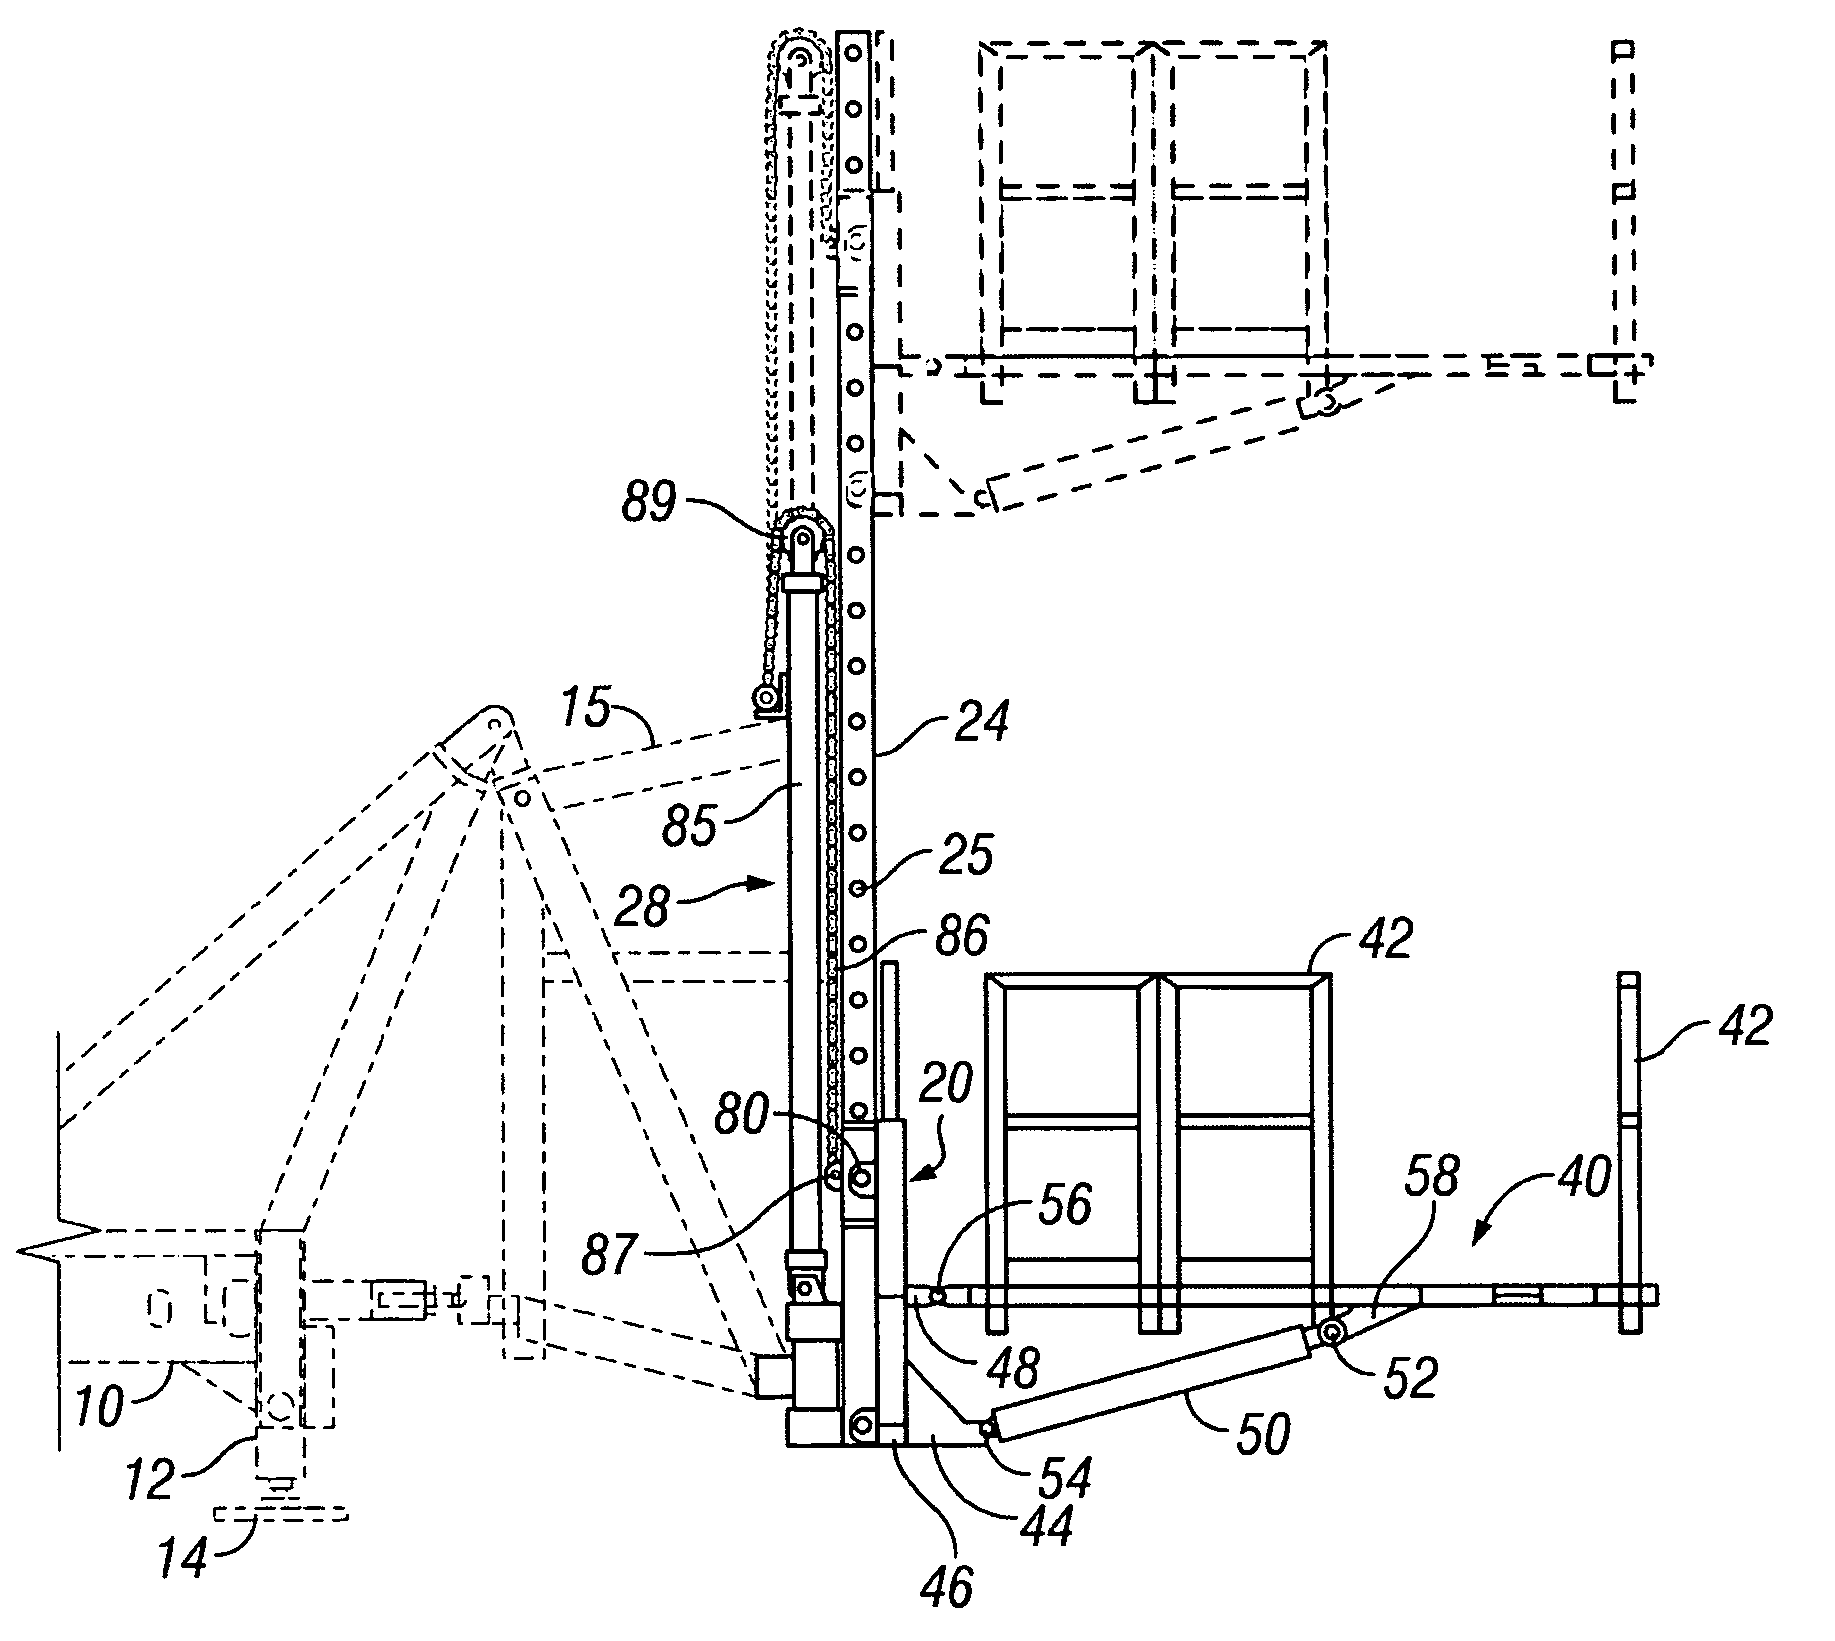 Automated system for positioning and supporting the work platform of a mobile workover and well-servicing rig